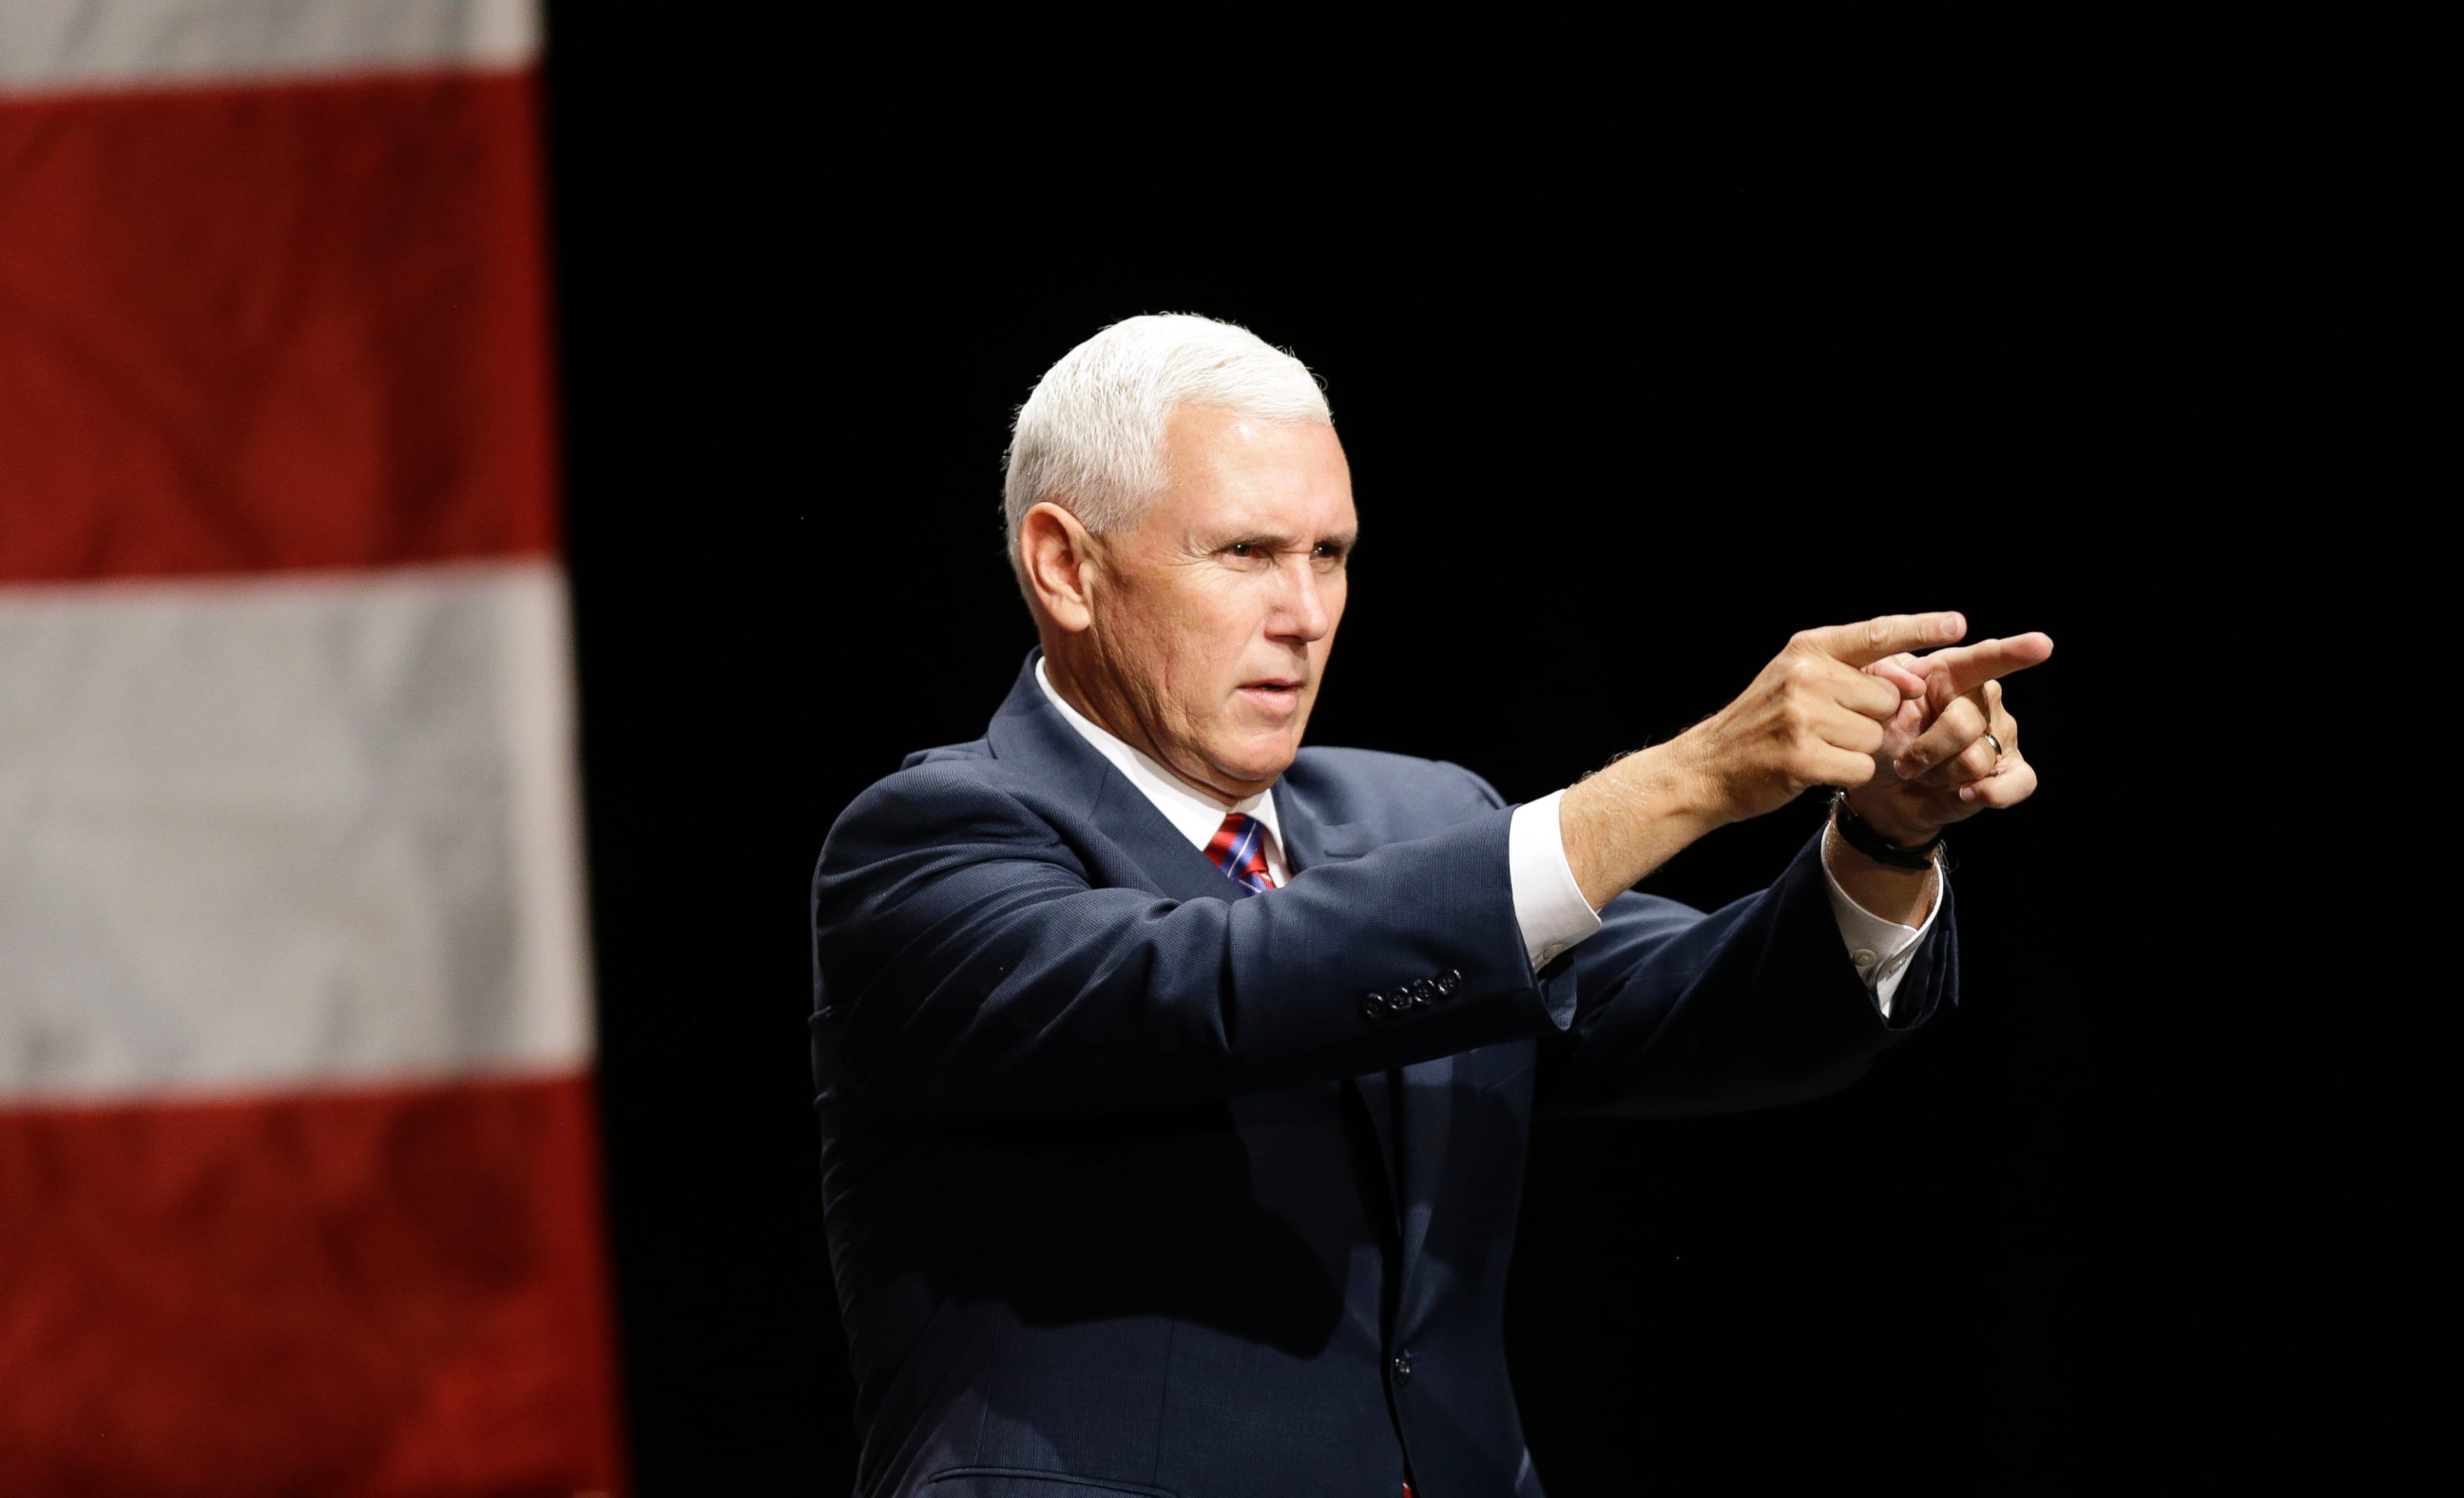 PHOTO: Republican vice presidential candidate, Indiana Gov. Mike Pence reacts to the audience during a town hall meeting in Raleigh, N.C., Aug. 4, 2016.